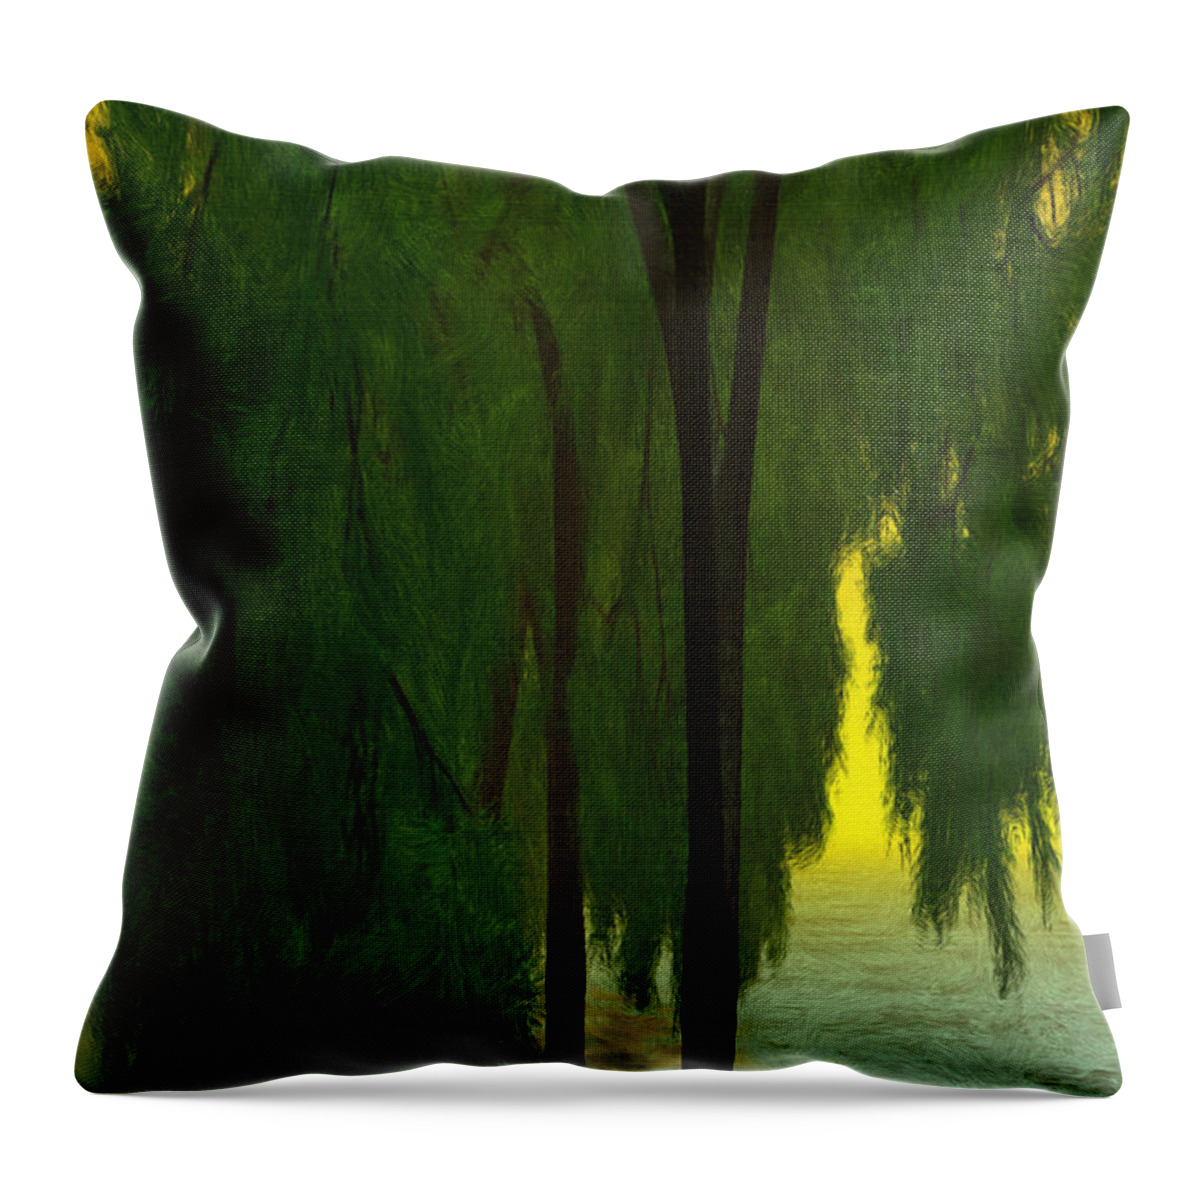 Yellow Throw Pillow featuring the painting Sunrise At Waters Edge by Wayne Bonney